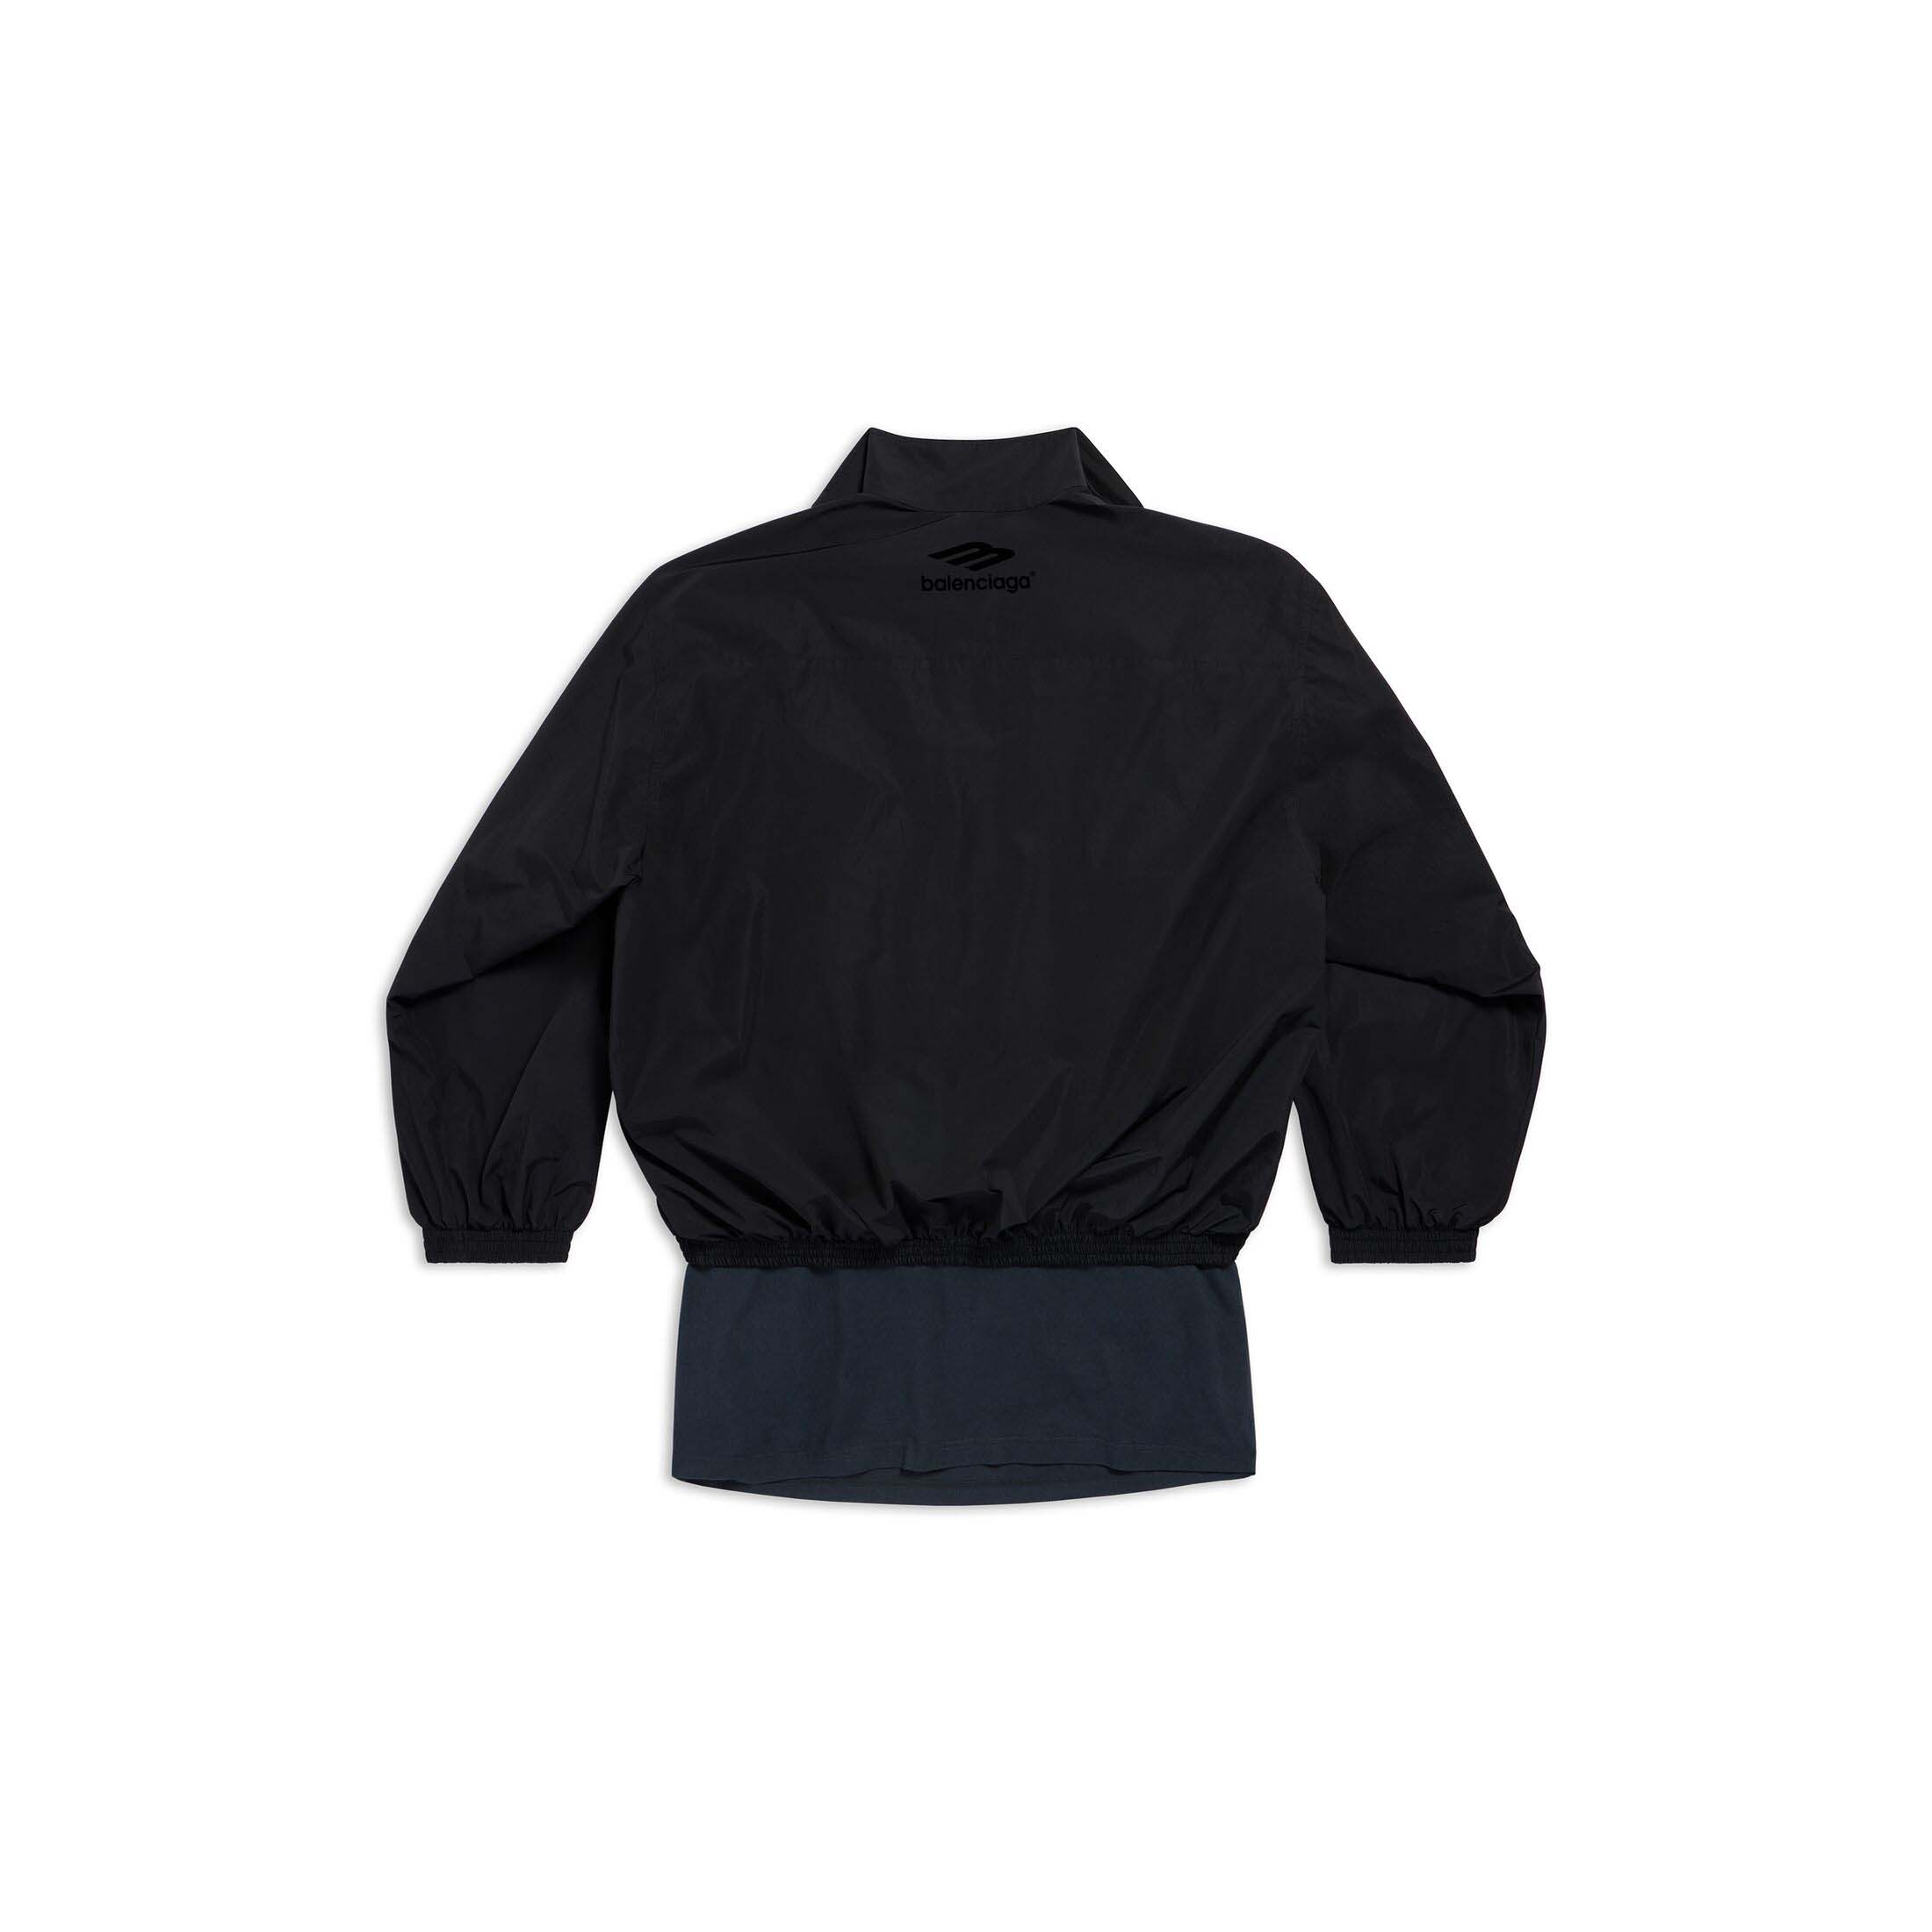 Balenciaga Patched Tracksuit Jacket in Black Black Men's - FW23 - US